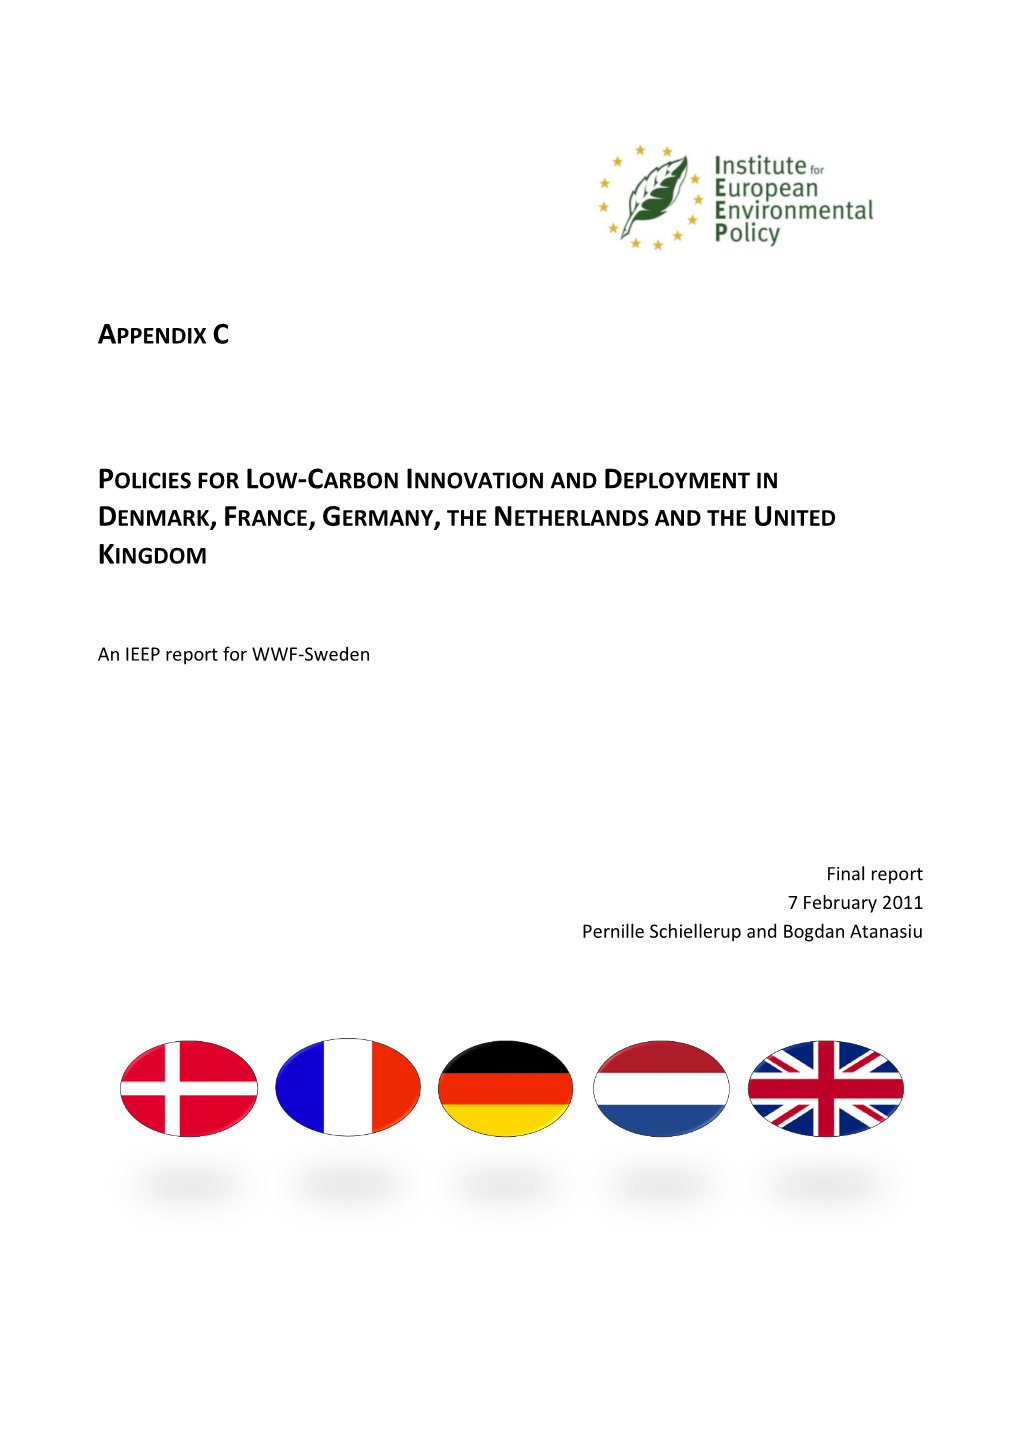 Appendix C Policies for Low-Carbon Innovation and Deployment in Denmark,France,Germany,The Netherlands and the United Kingdom